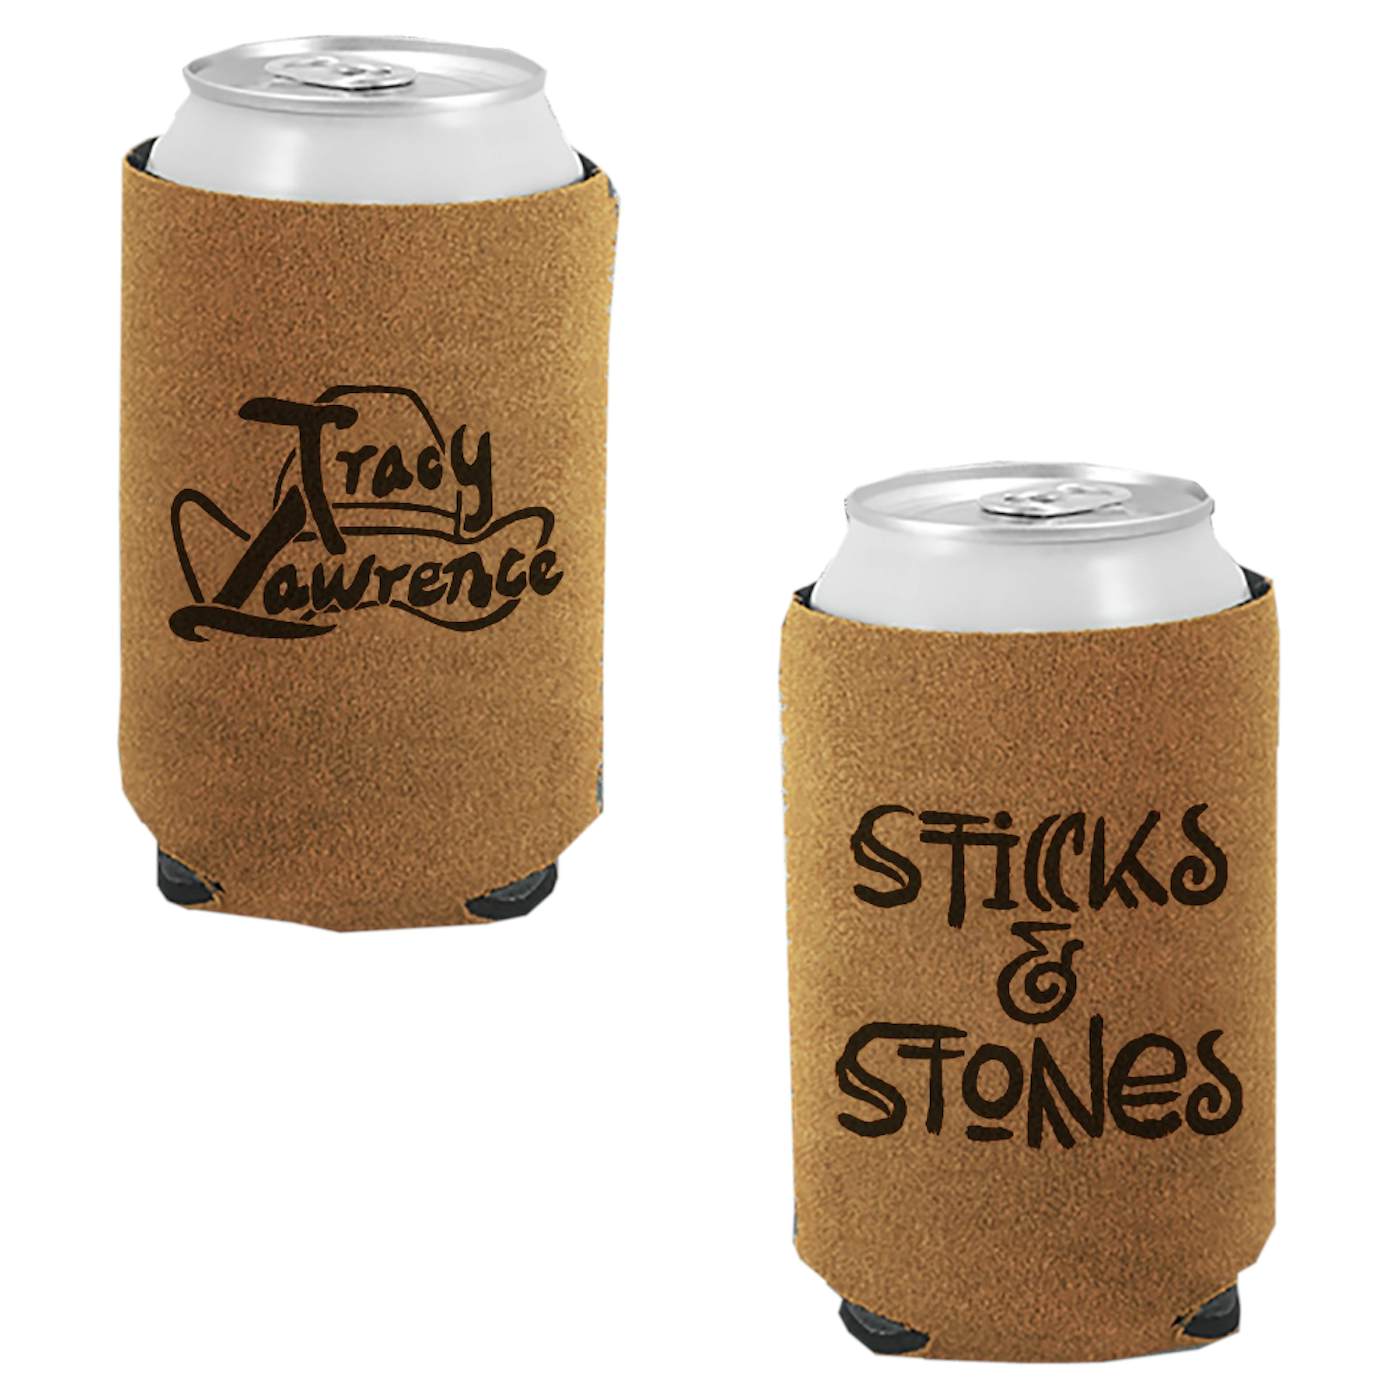 Tracy Lawrence Suede Sticks and Stones Coolie